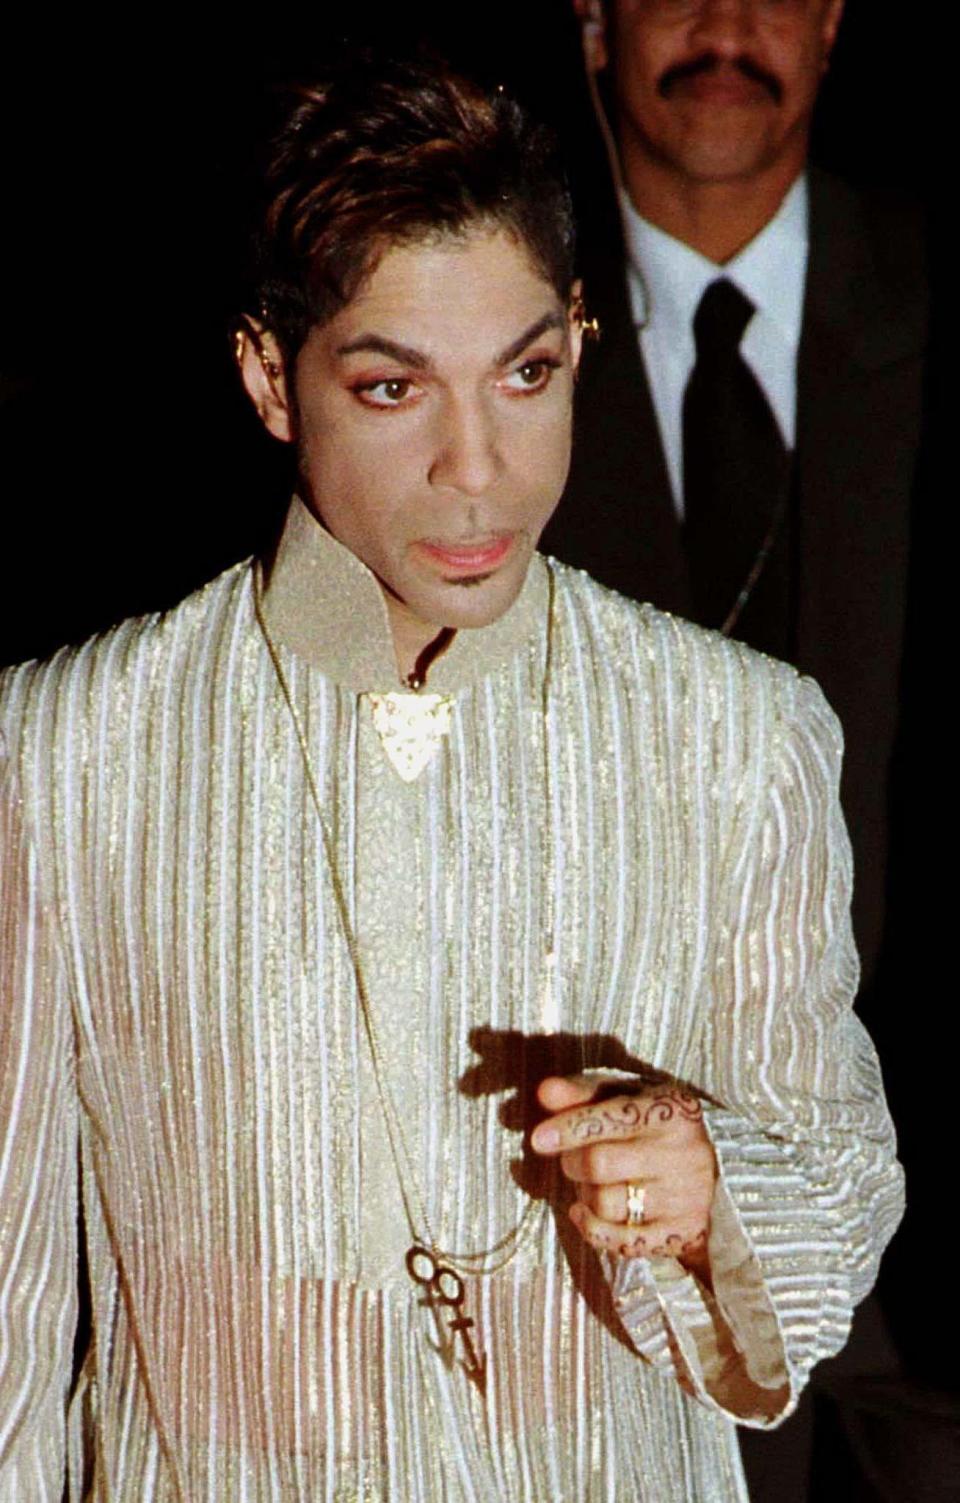 Singer-songwriter The Artist formerly known as Prince, arrives at the 10th Anniversary Essence Awards Celebration in New York, April 4. The awards show, presented by Essence Magazine, is held to recognise achievement by exceptional African Americans.